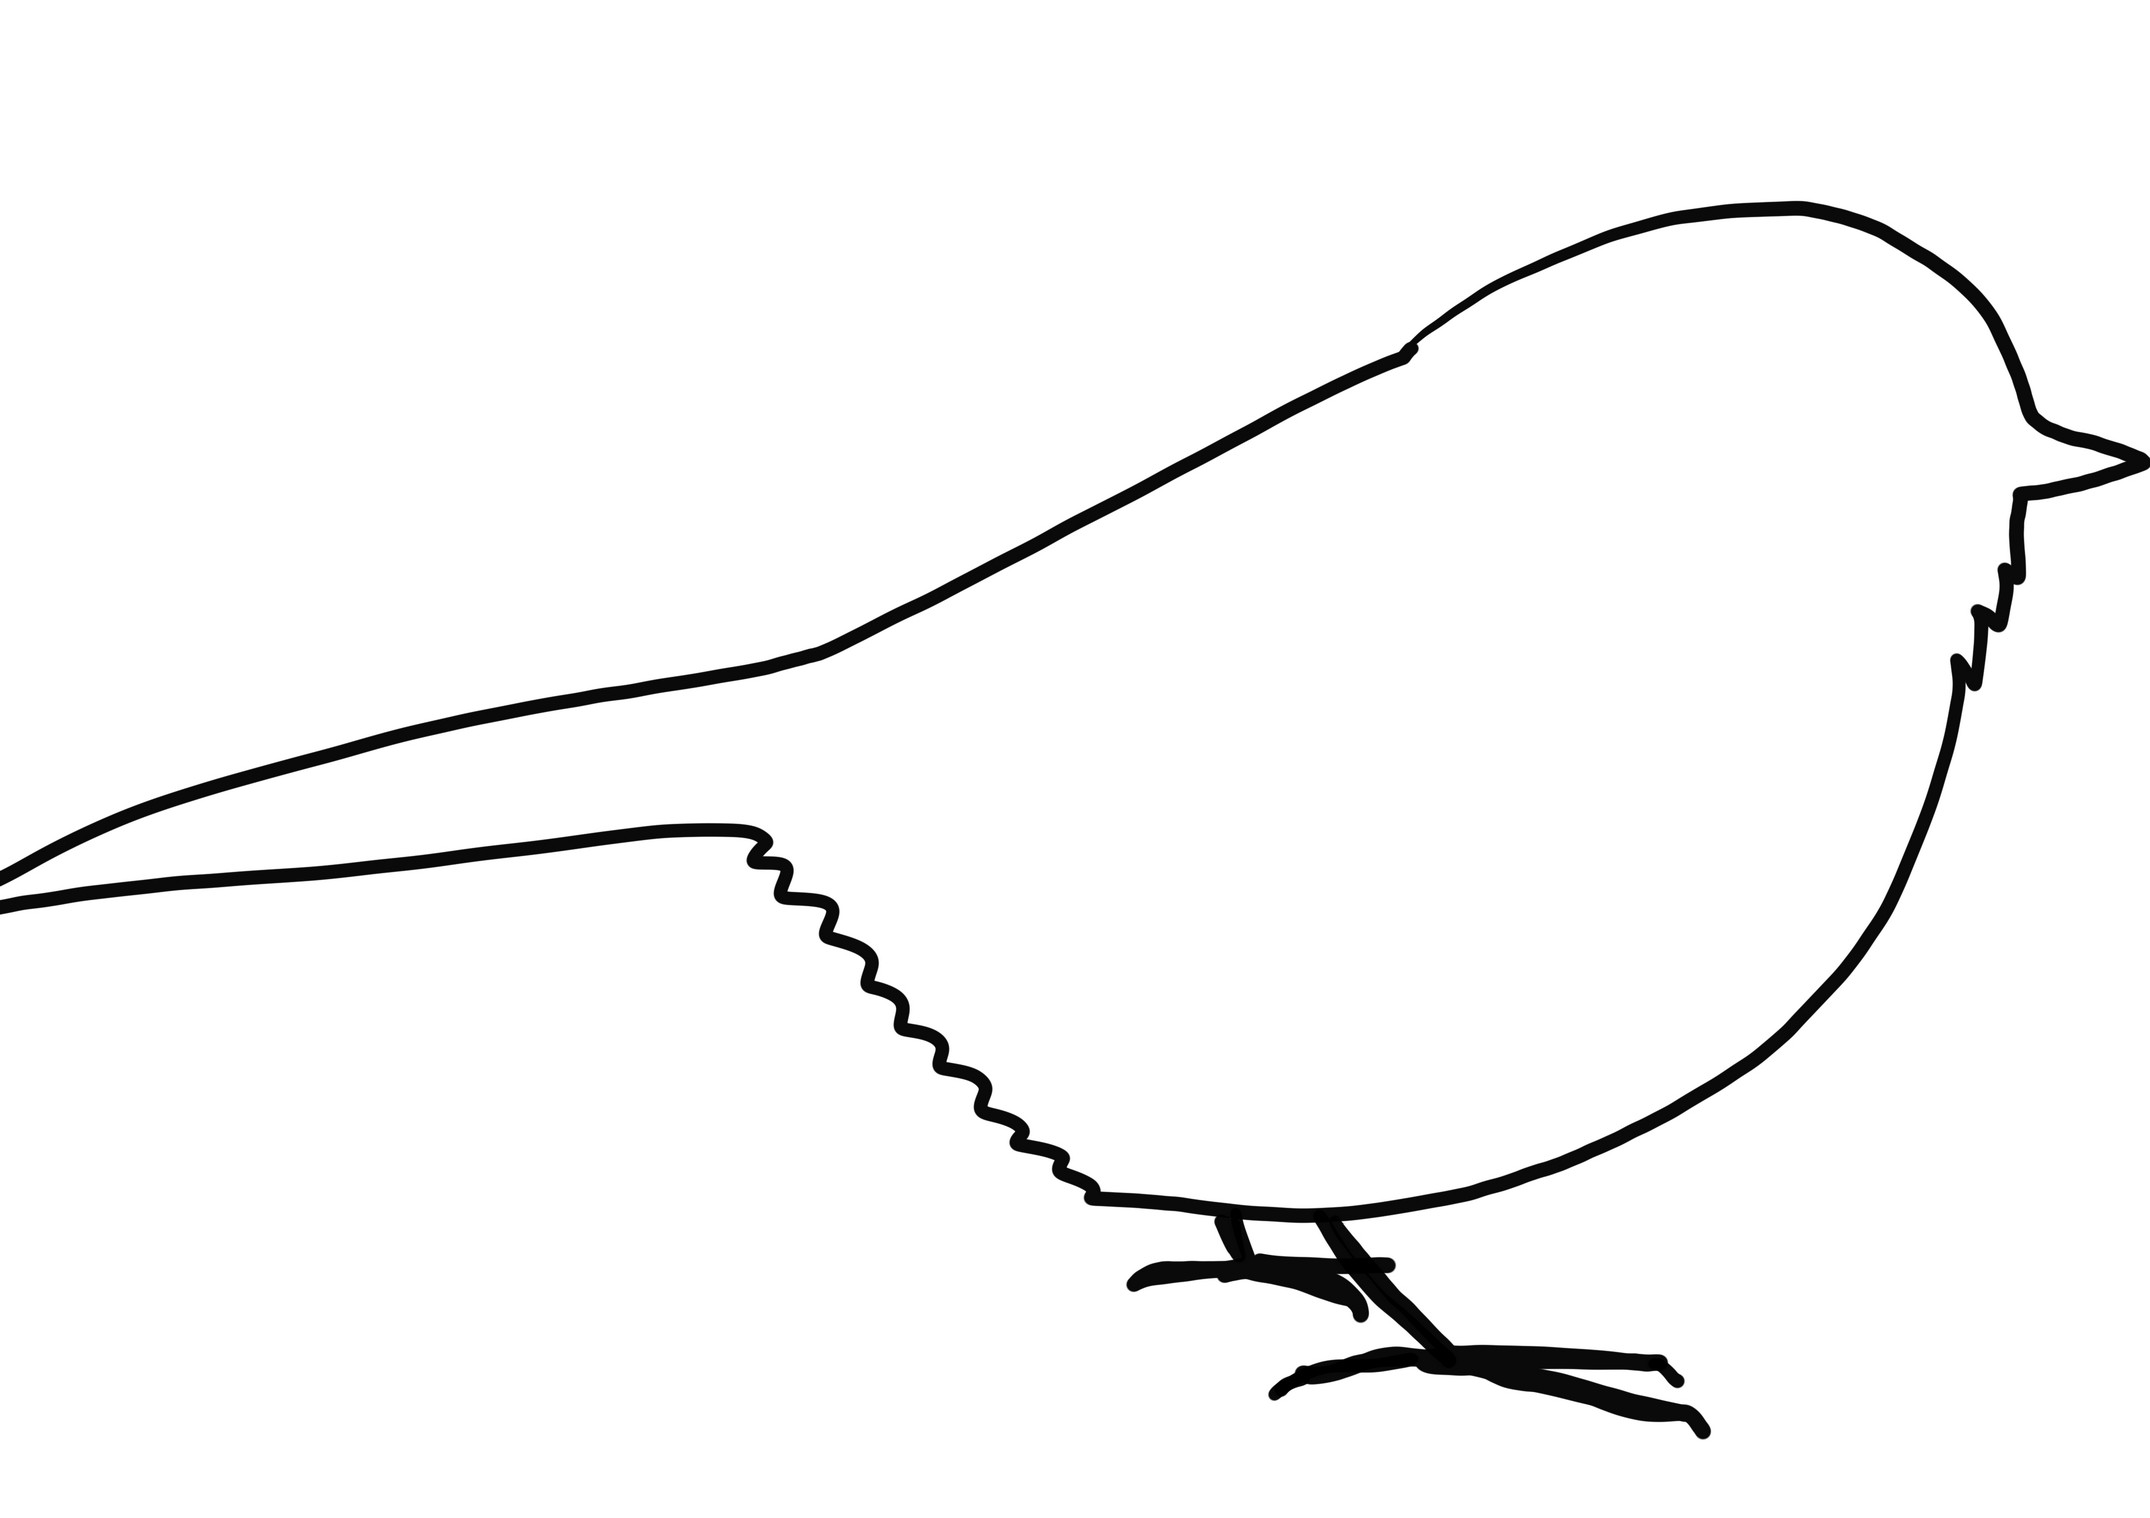 Poecile atricapillus silhouette coloring page